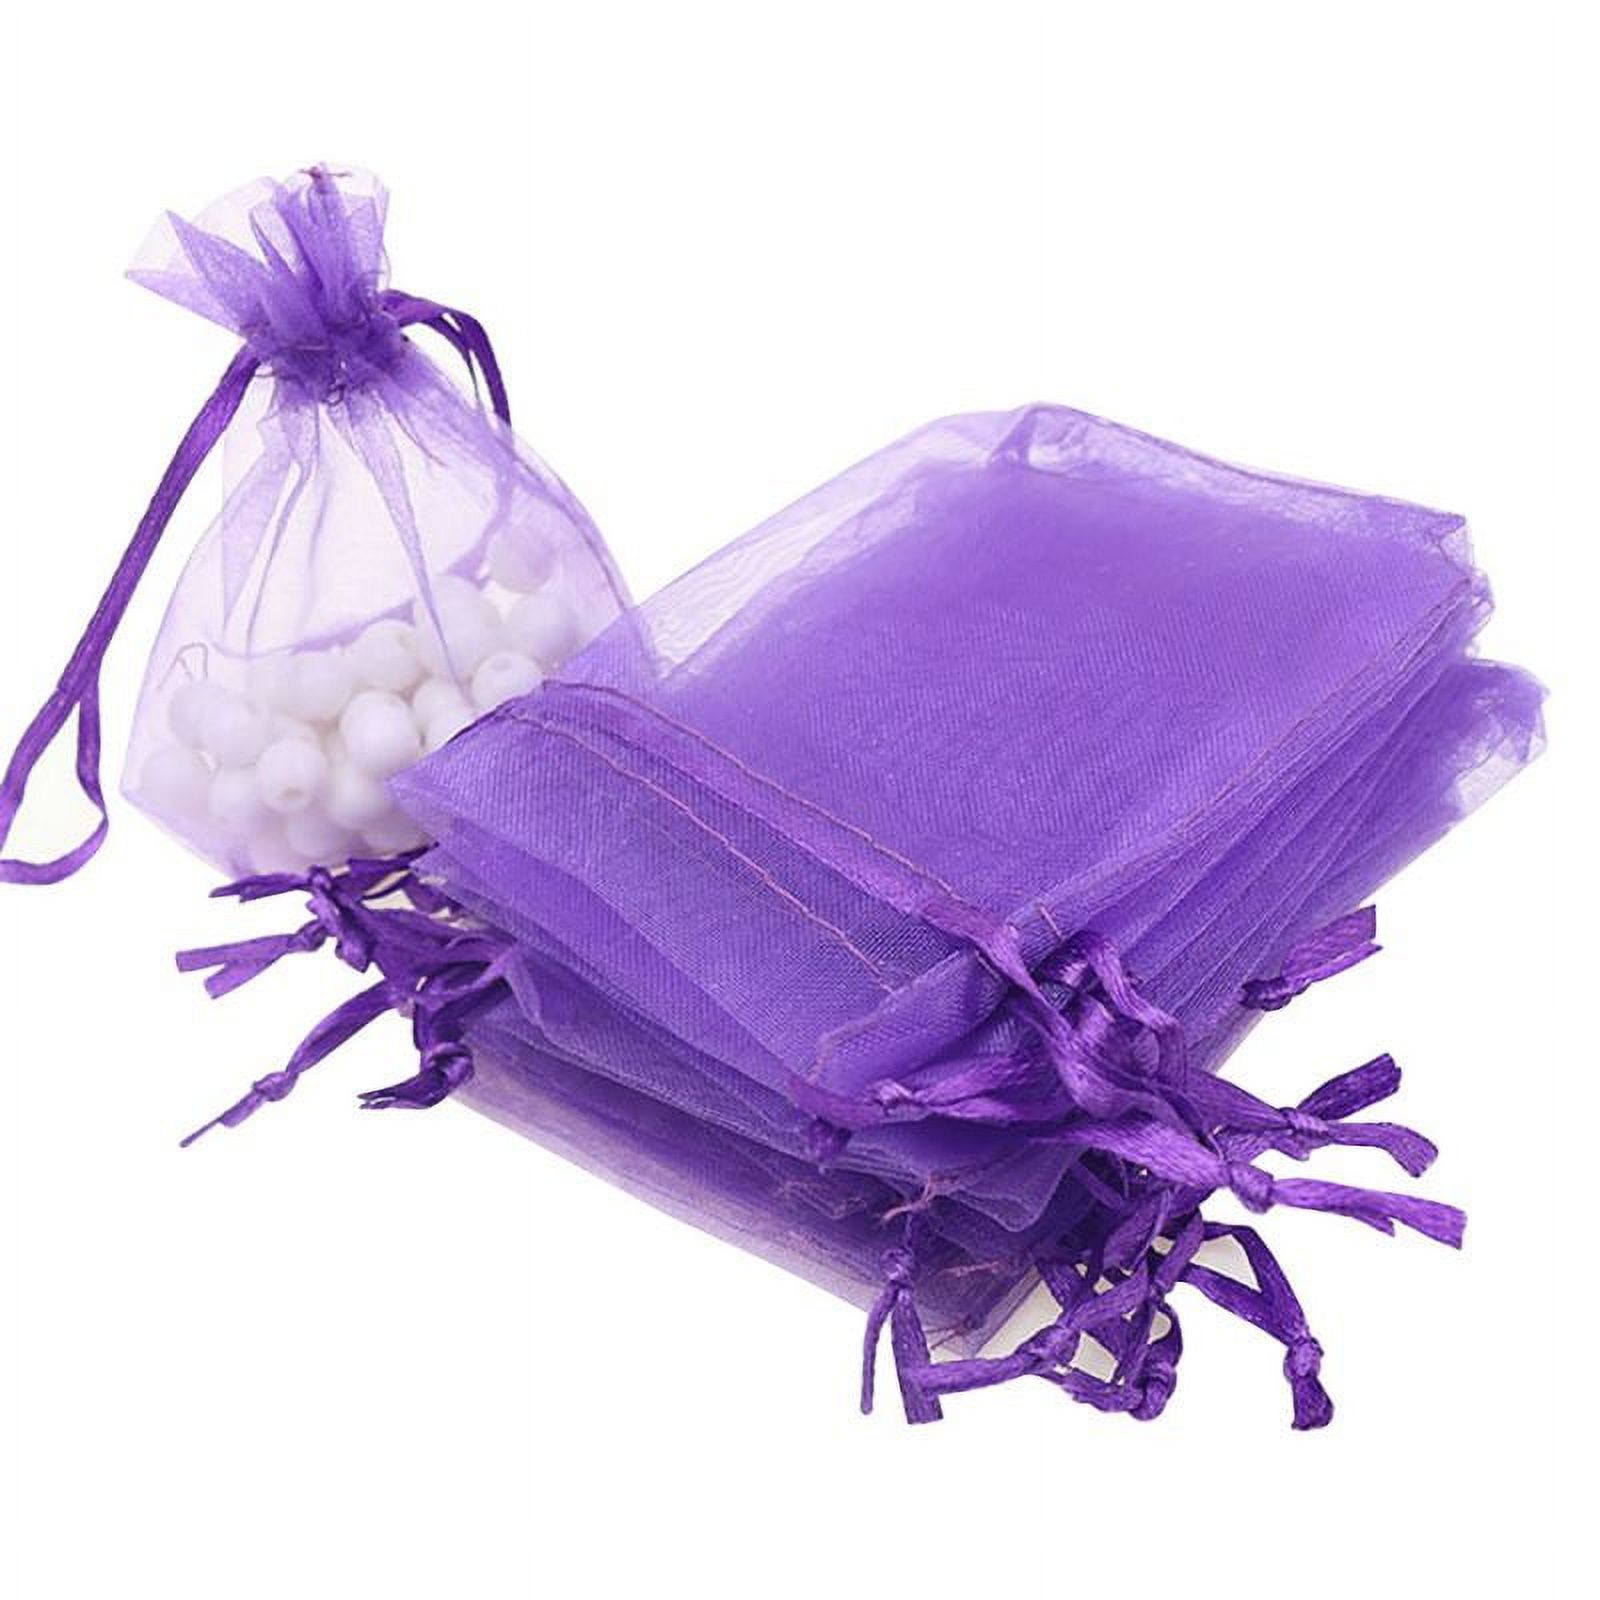 100Pcs Mini Gift Bags Pouches Organza Jewelry Drawstring Bags For Wedding/Party - image 1 of 1